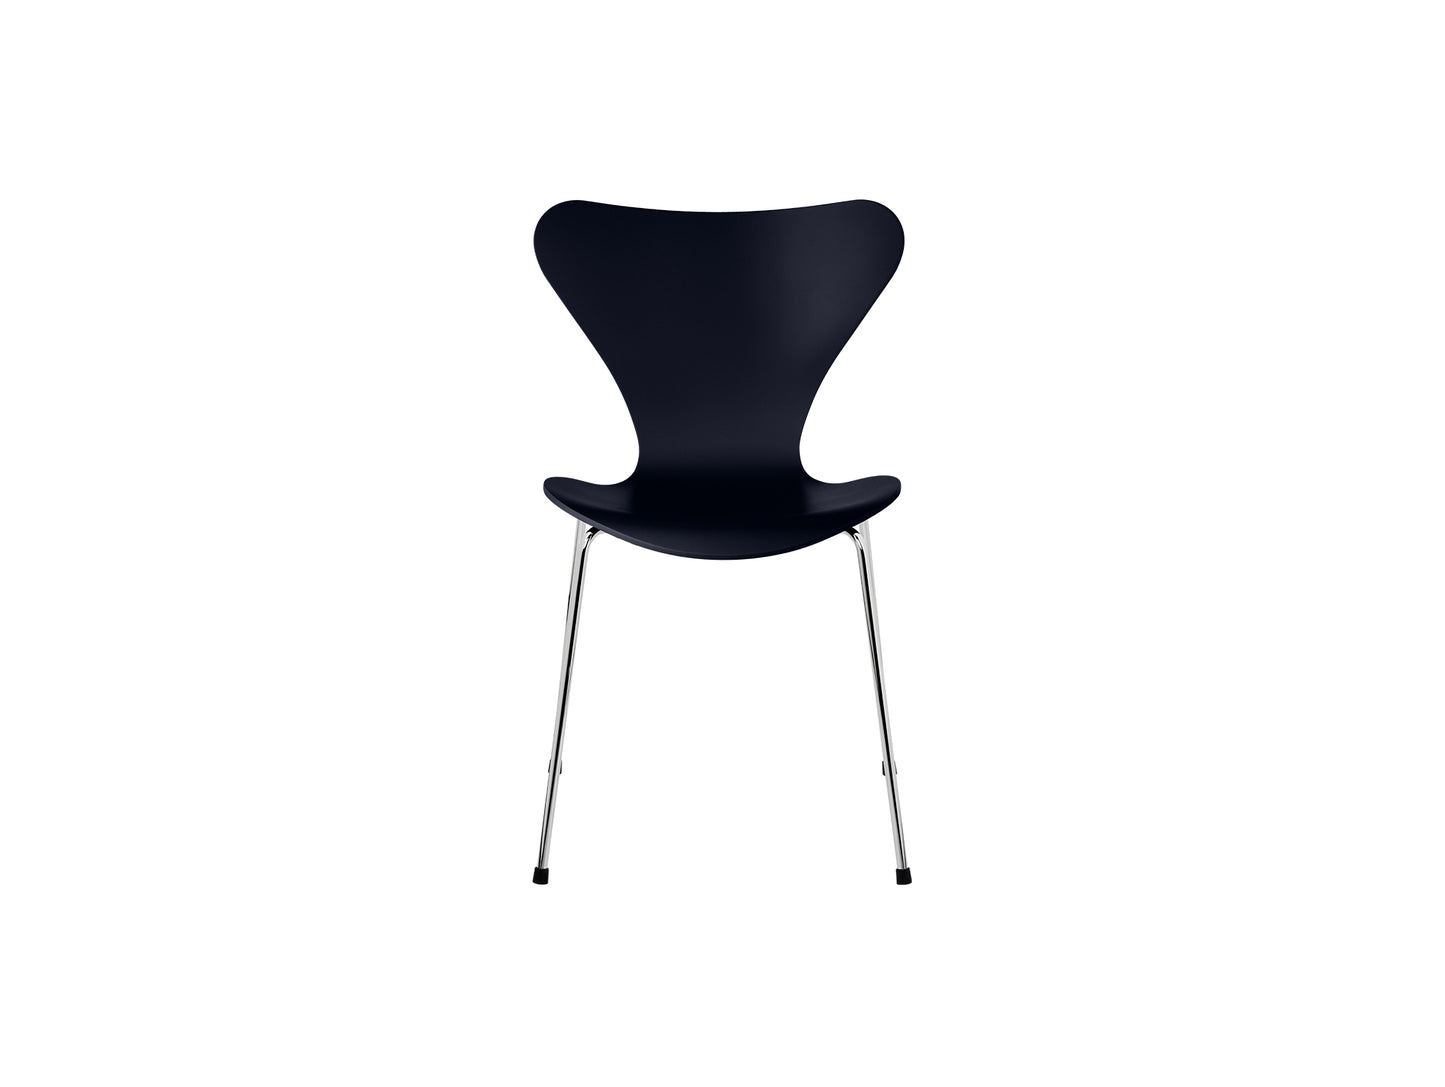 Series 7™ 3107 Dining Chair by Fritz Hansen - Midnight Blue Lacquered Veneer Shell / Chromed Steel